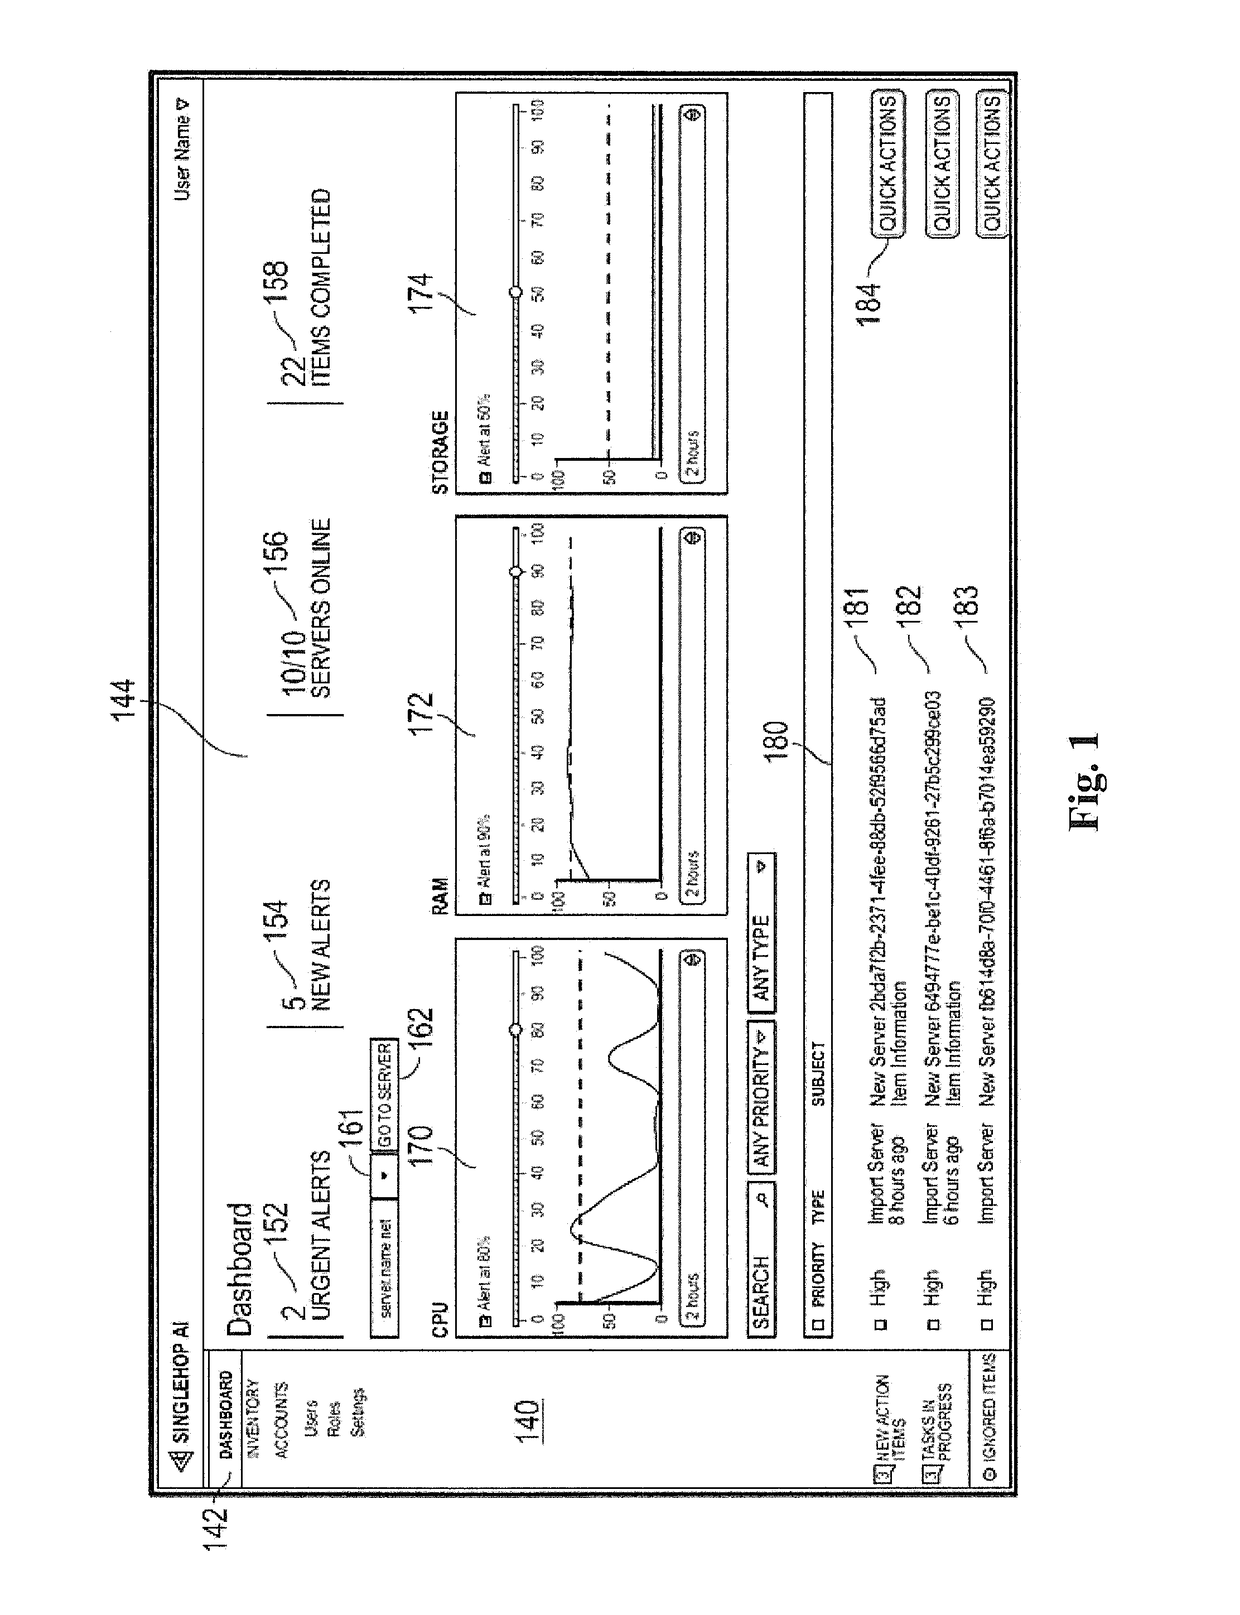 Systems and interface for remotely managing server operations